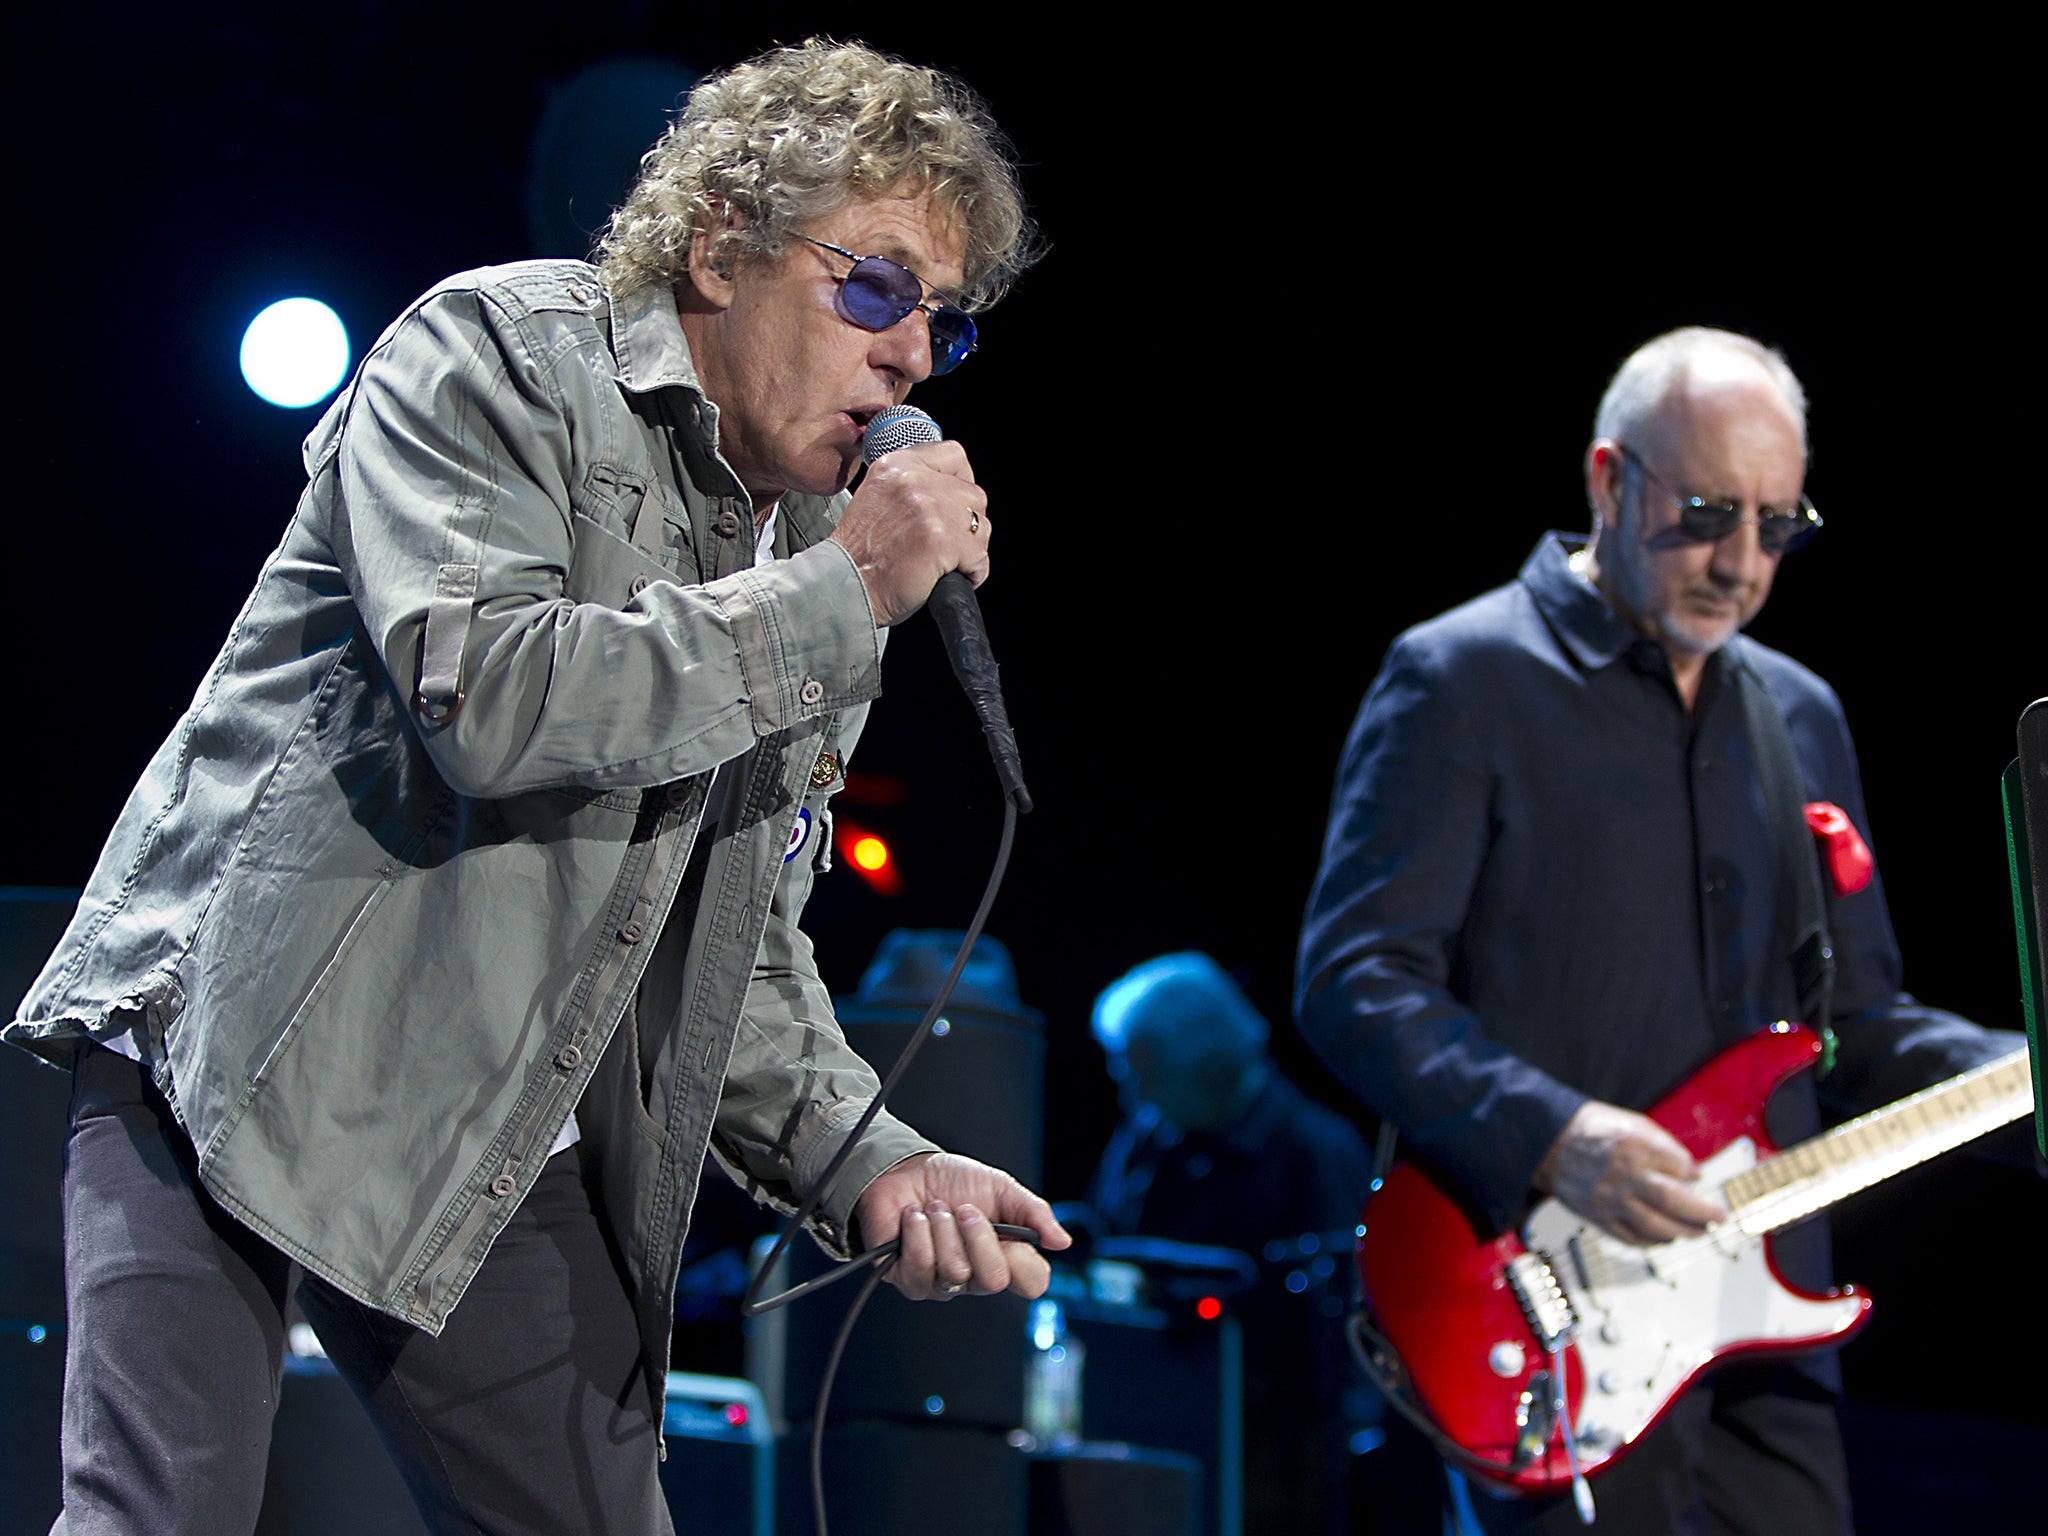 Roger Daltrey and Pete Townshend of The Who performing in 2013